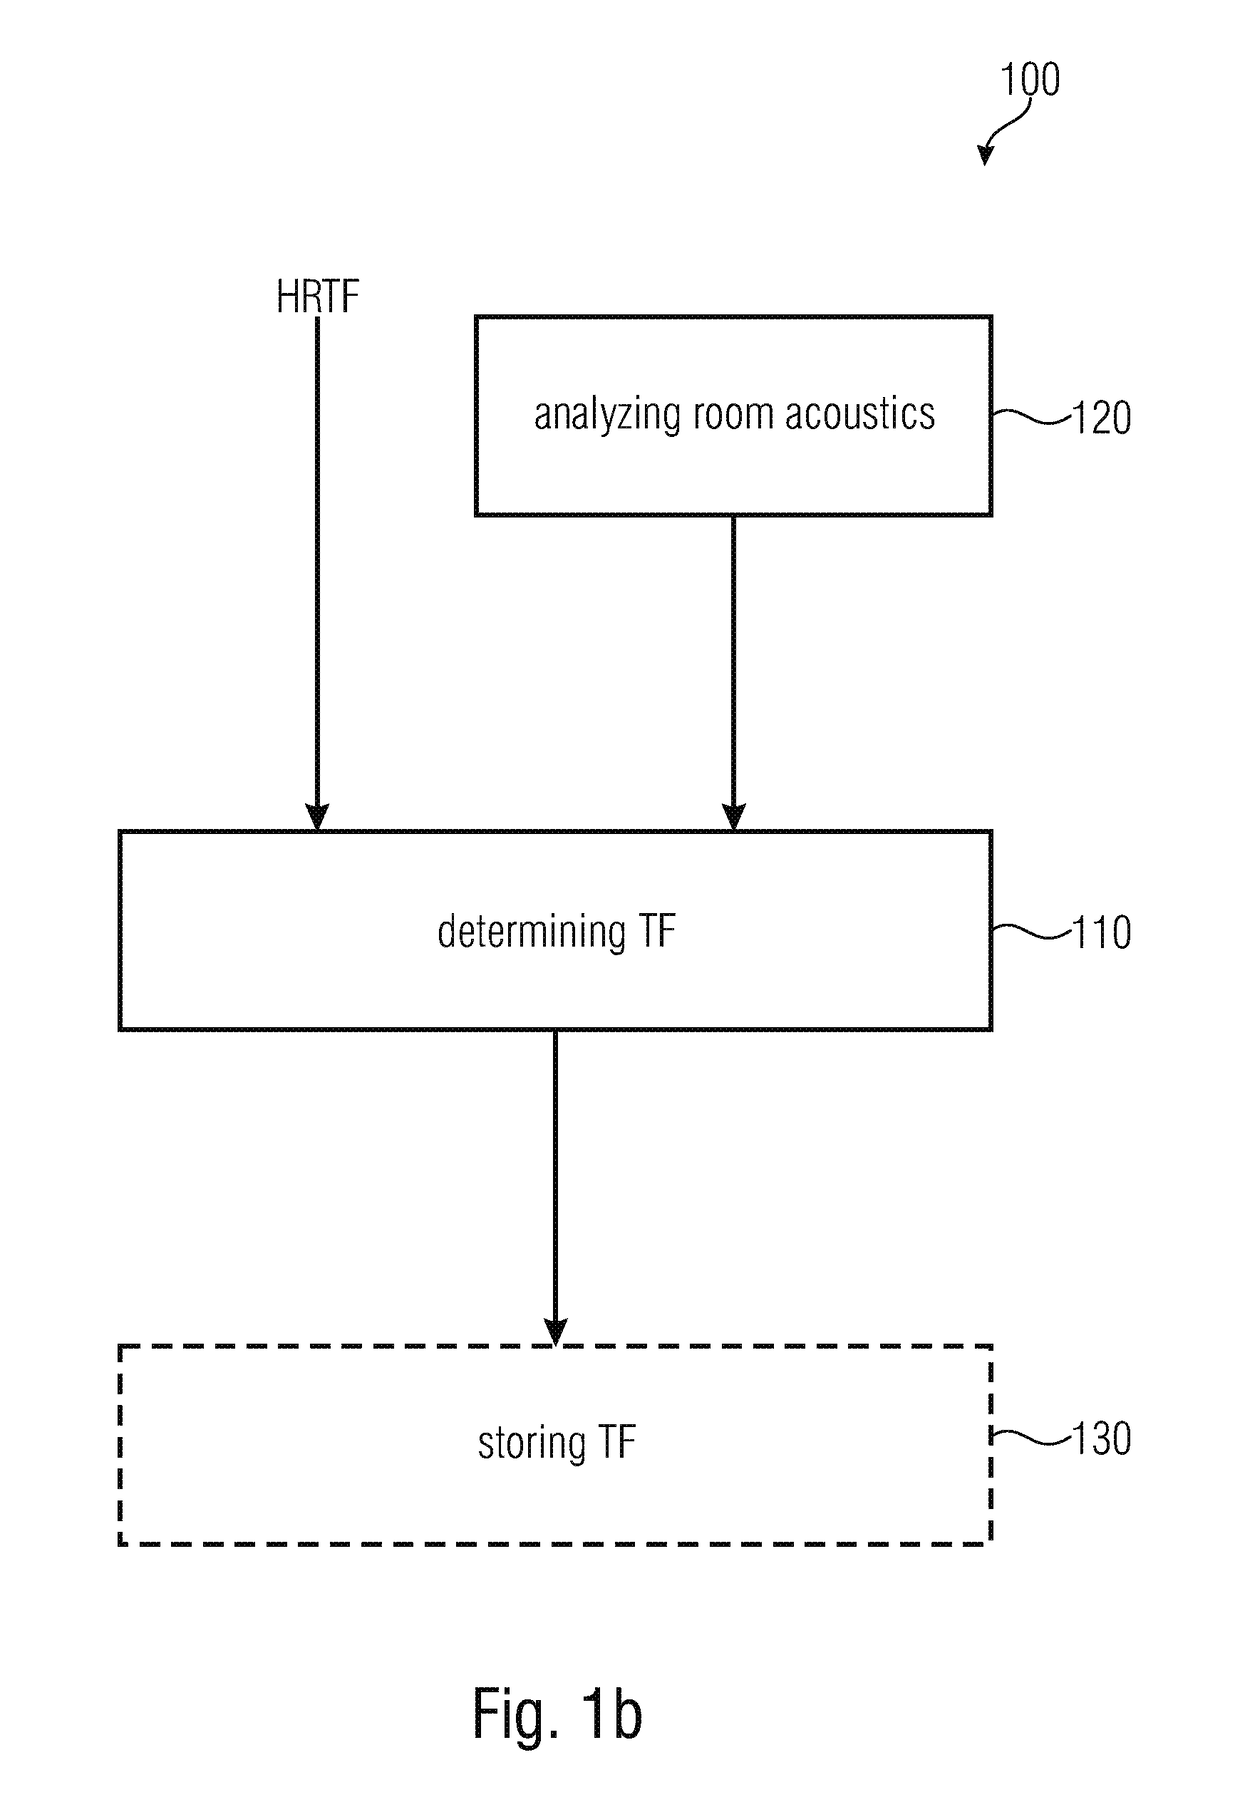 Determining and using room-optimized transfer functions